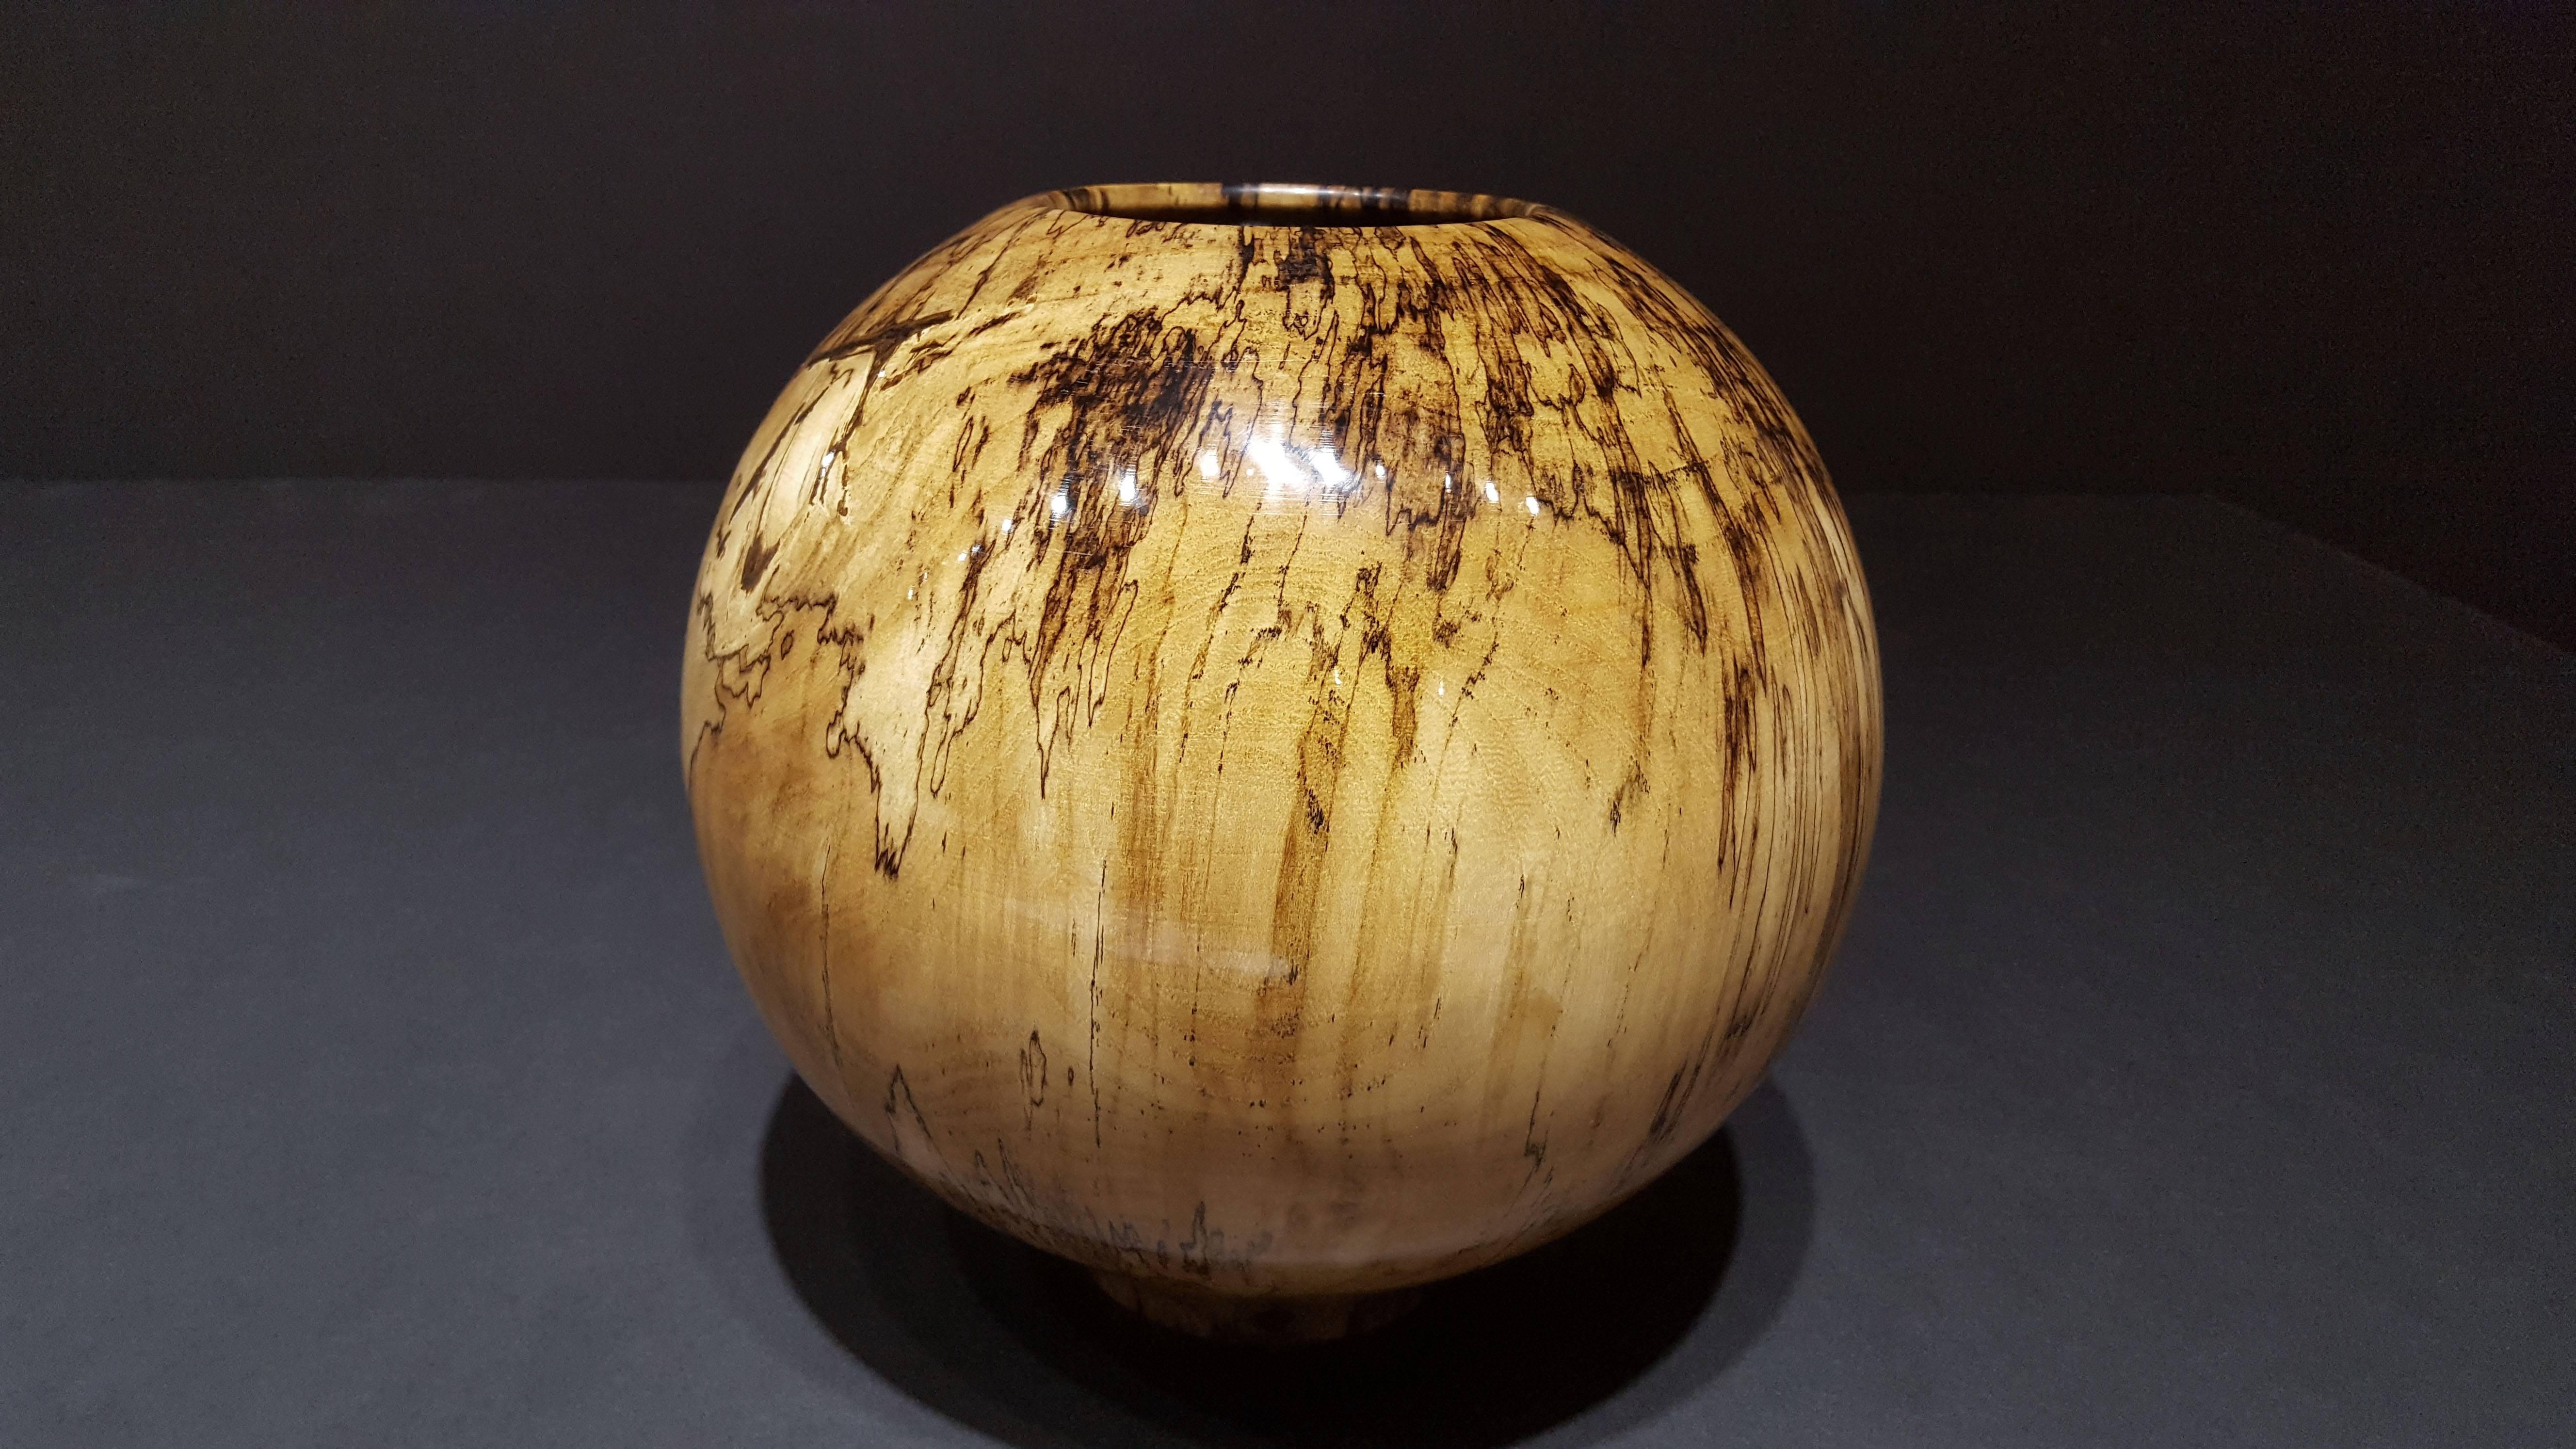 turned wood

Philip Moulthrop approaches his practice with the goal in mind to reveal the beauty and texture found in wood. He uses wood from trees native to his home in the southeastern United States. These are not exotic woods, however, they